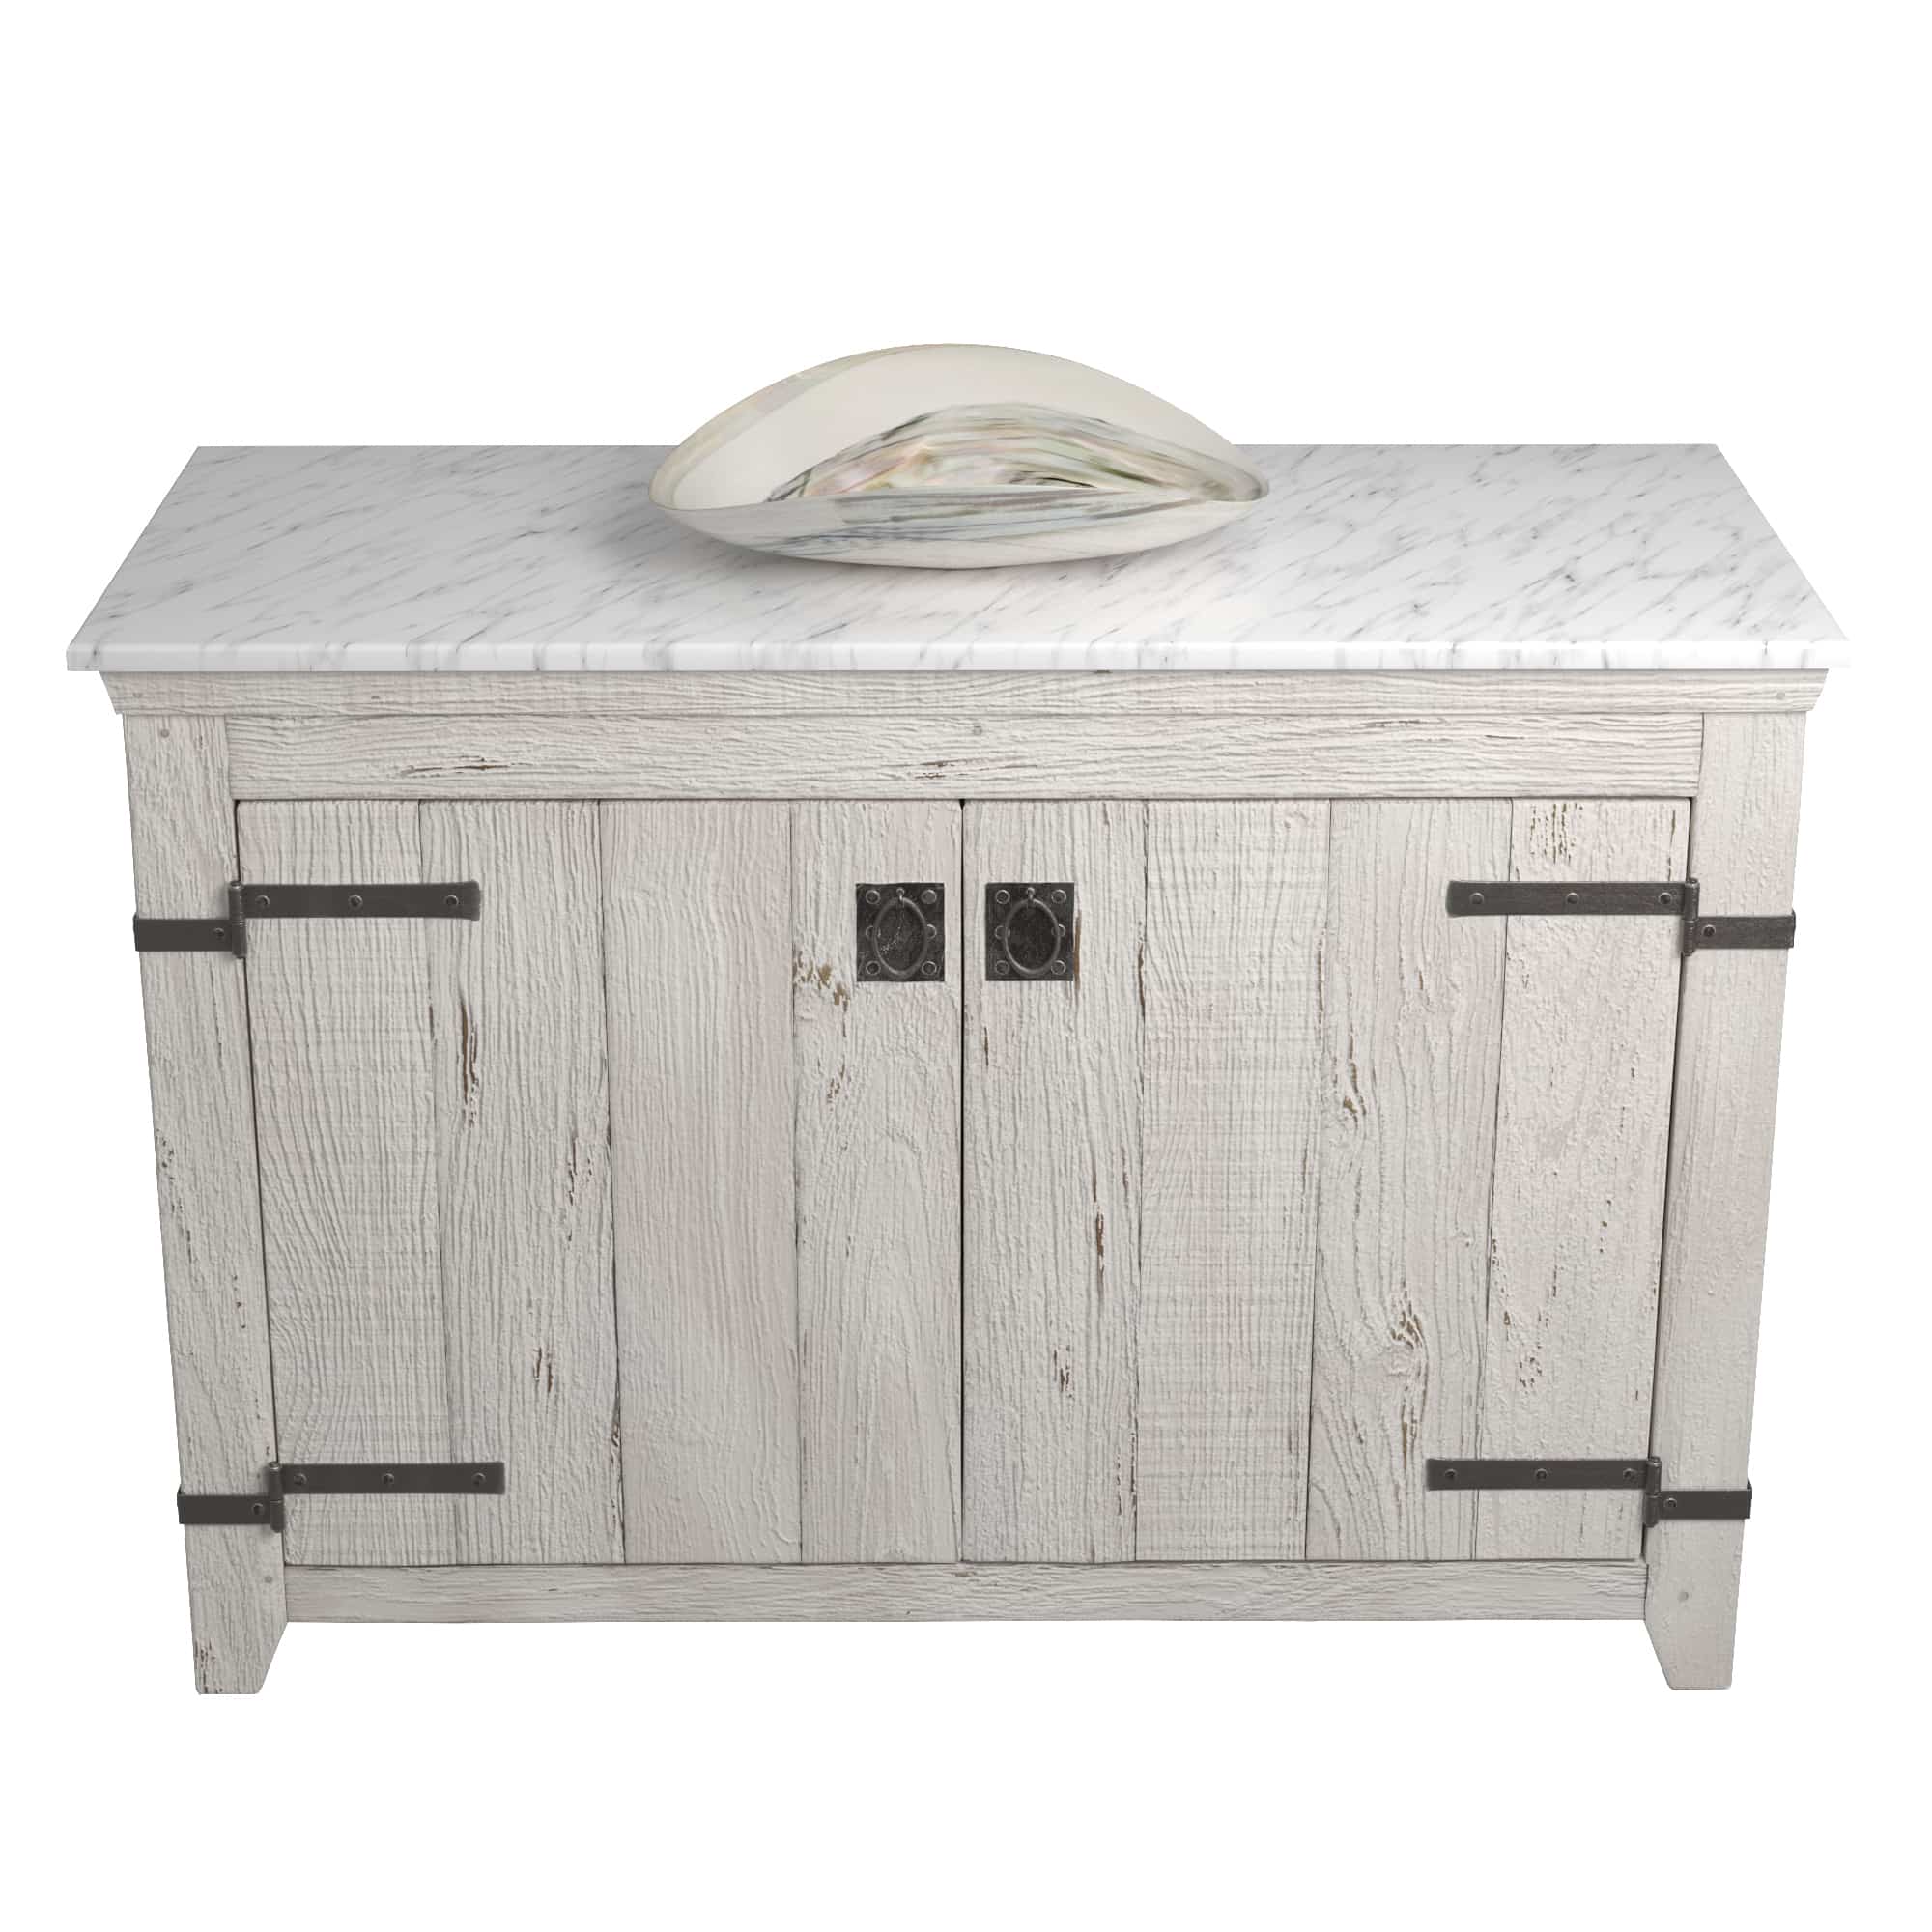 Native Trails 48" Americana Vanity in Whitewash with Carrara Marble Top and Sorrento in Abalone, No Faucet Hole, BND48-VB-CT-MG-090